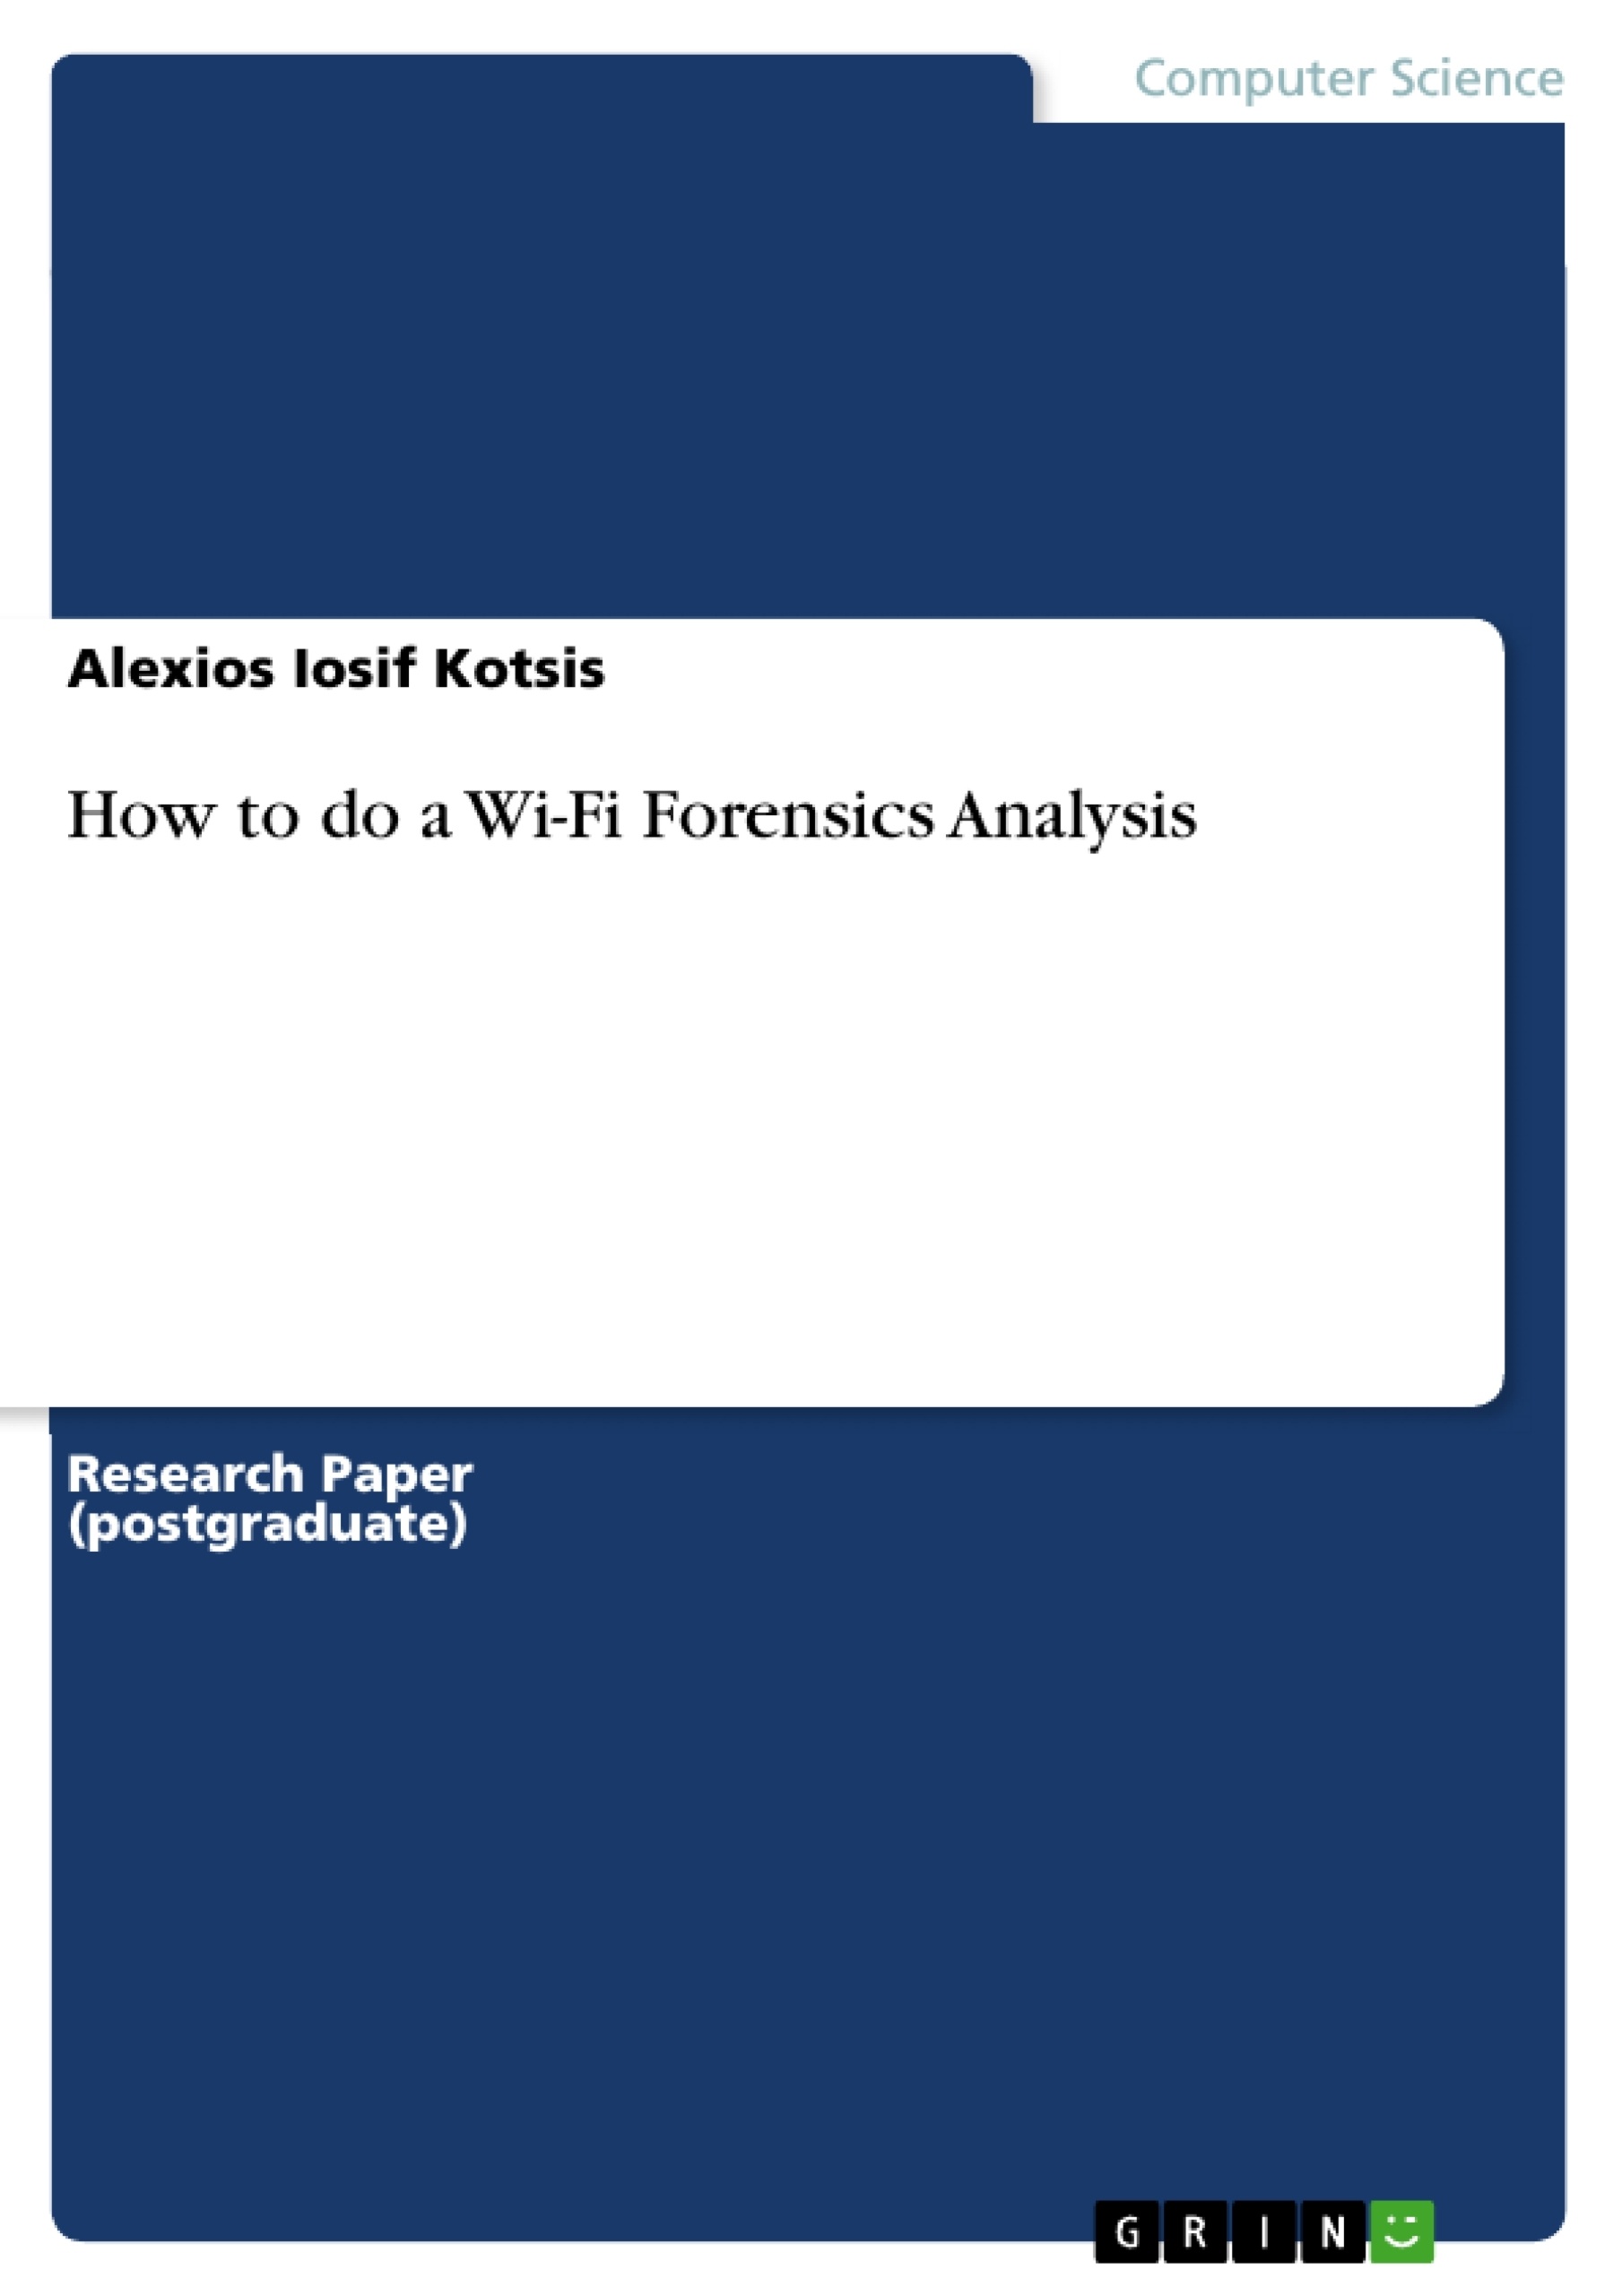 Title: How to do a Wi-Fi Forensics Analysis